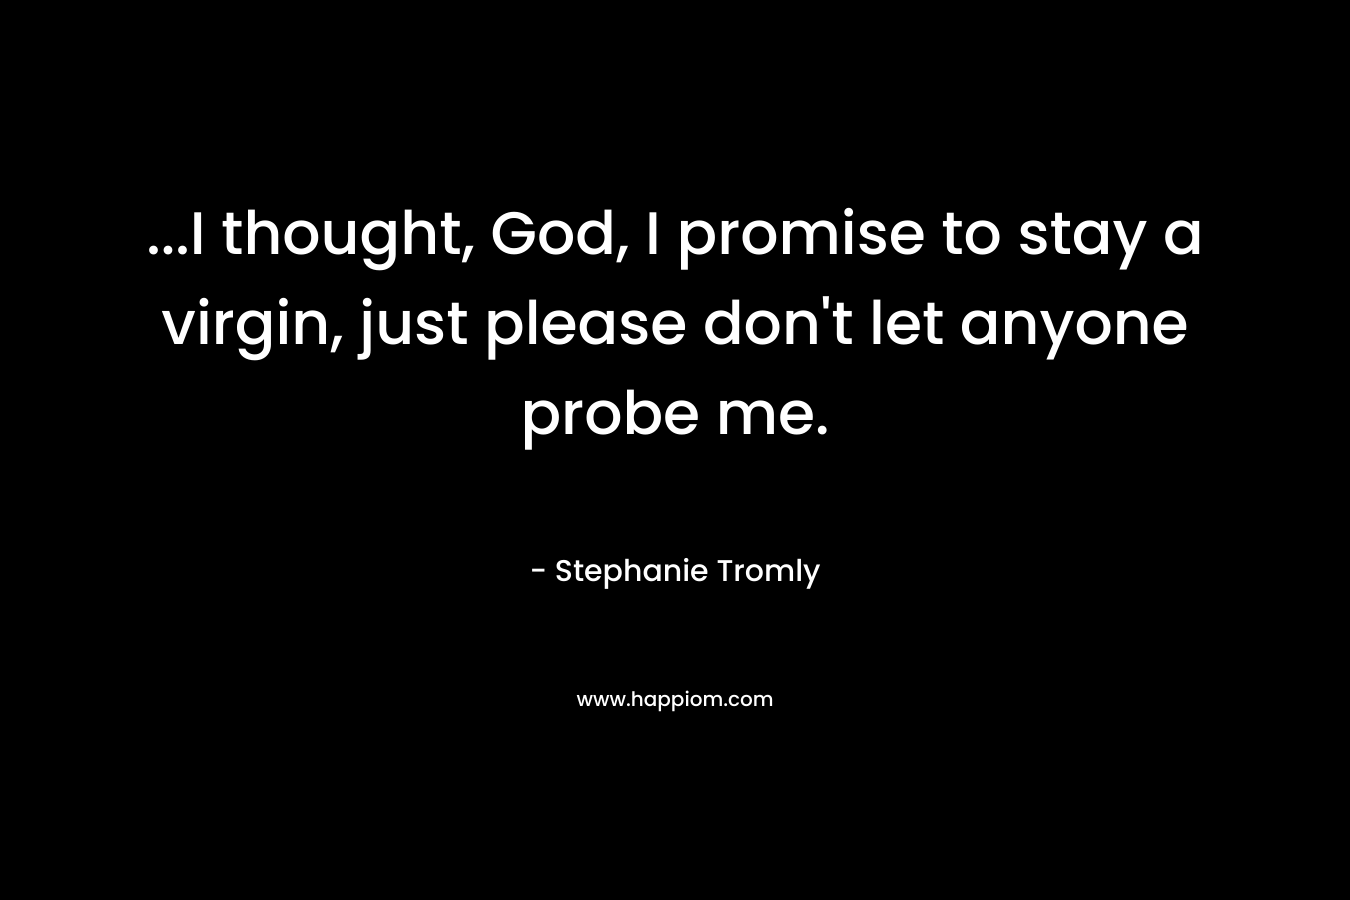 …I thought, God, I promise to stay a virgin, just please don’t let anyone probe me. – Stephanie Tromly